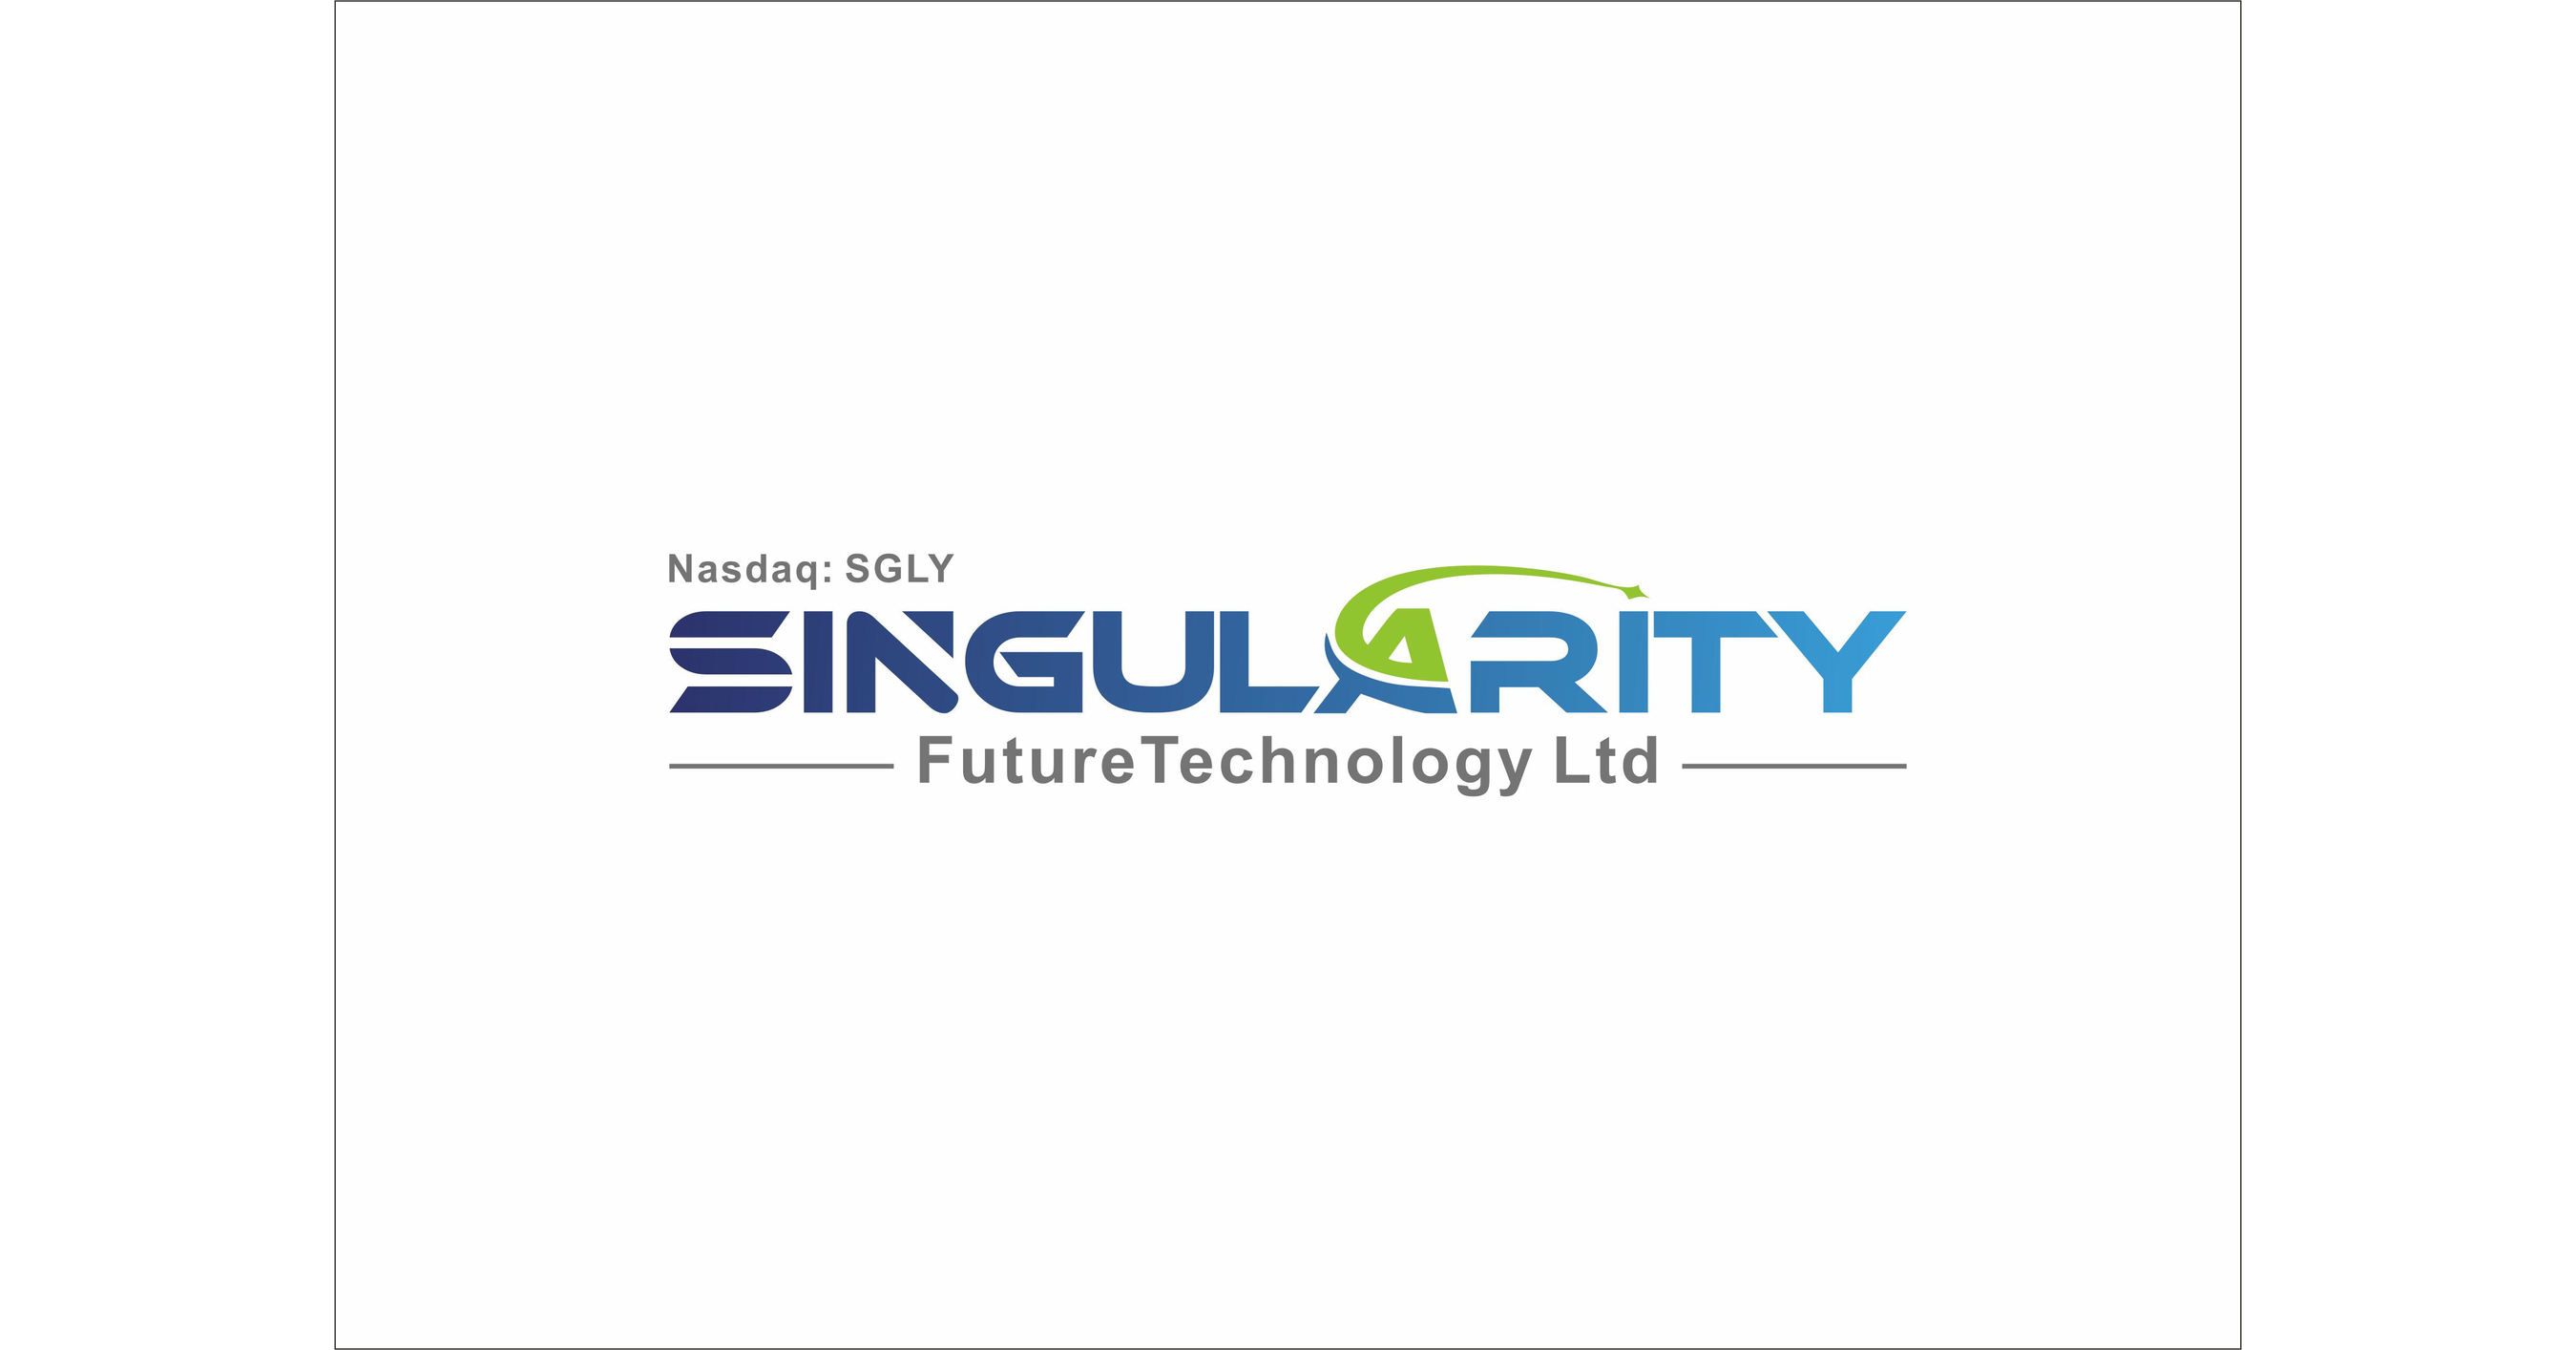 Singularity Future Technology Expanding into New Internet Data Center (IDC) Facility in New Jersey; Strategic Location for Planned Distributed Storage Service Provider Business